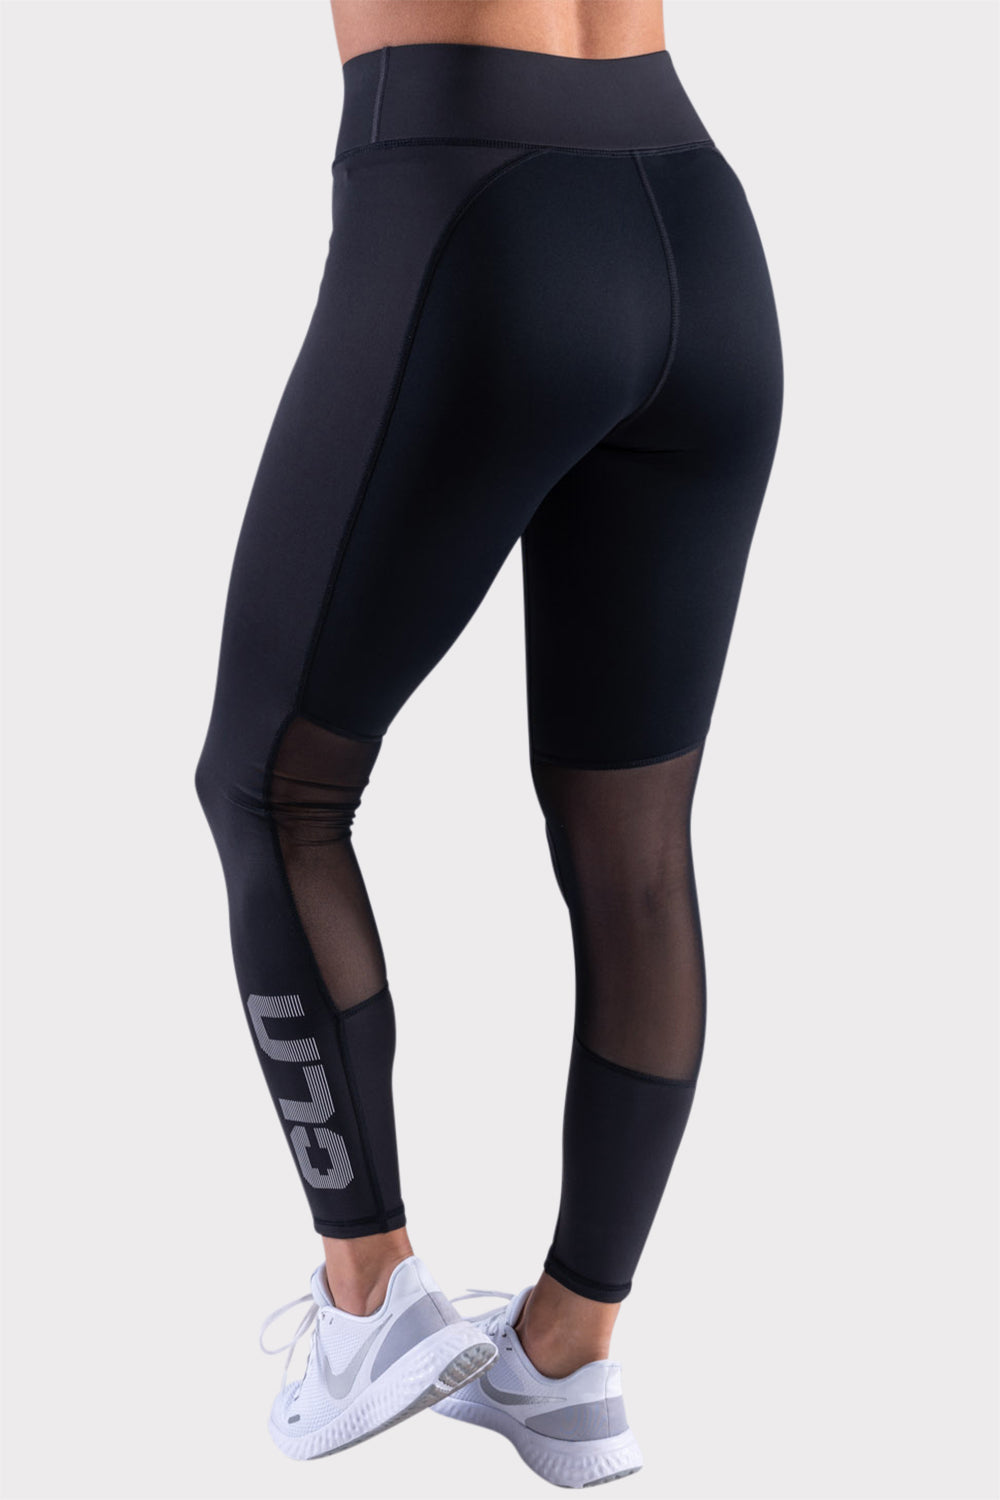 CLN Freedom Tights - Carbone 